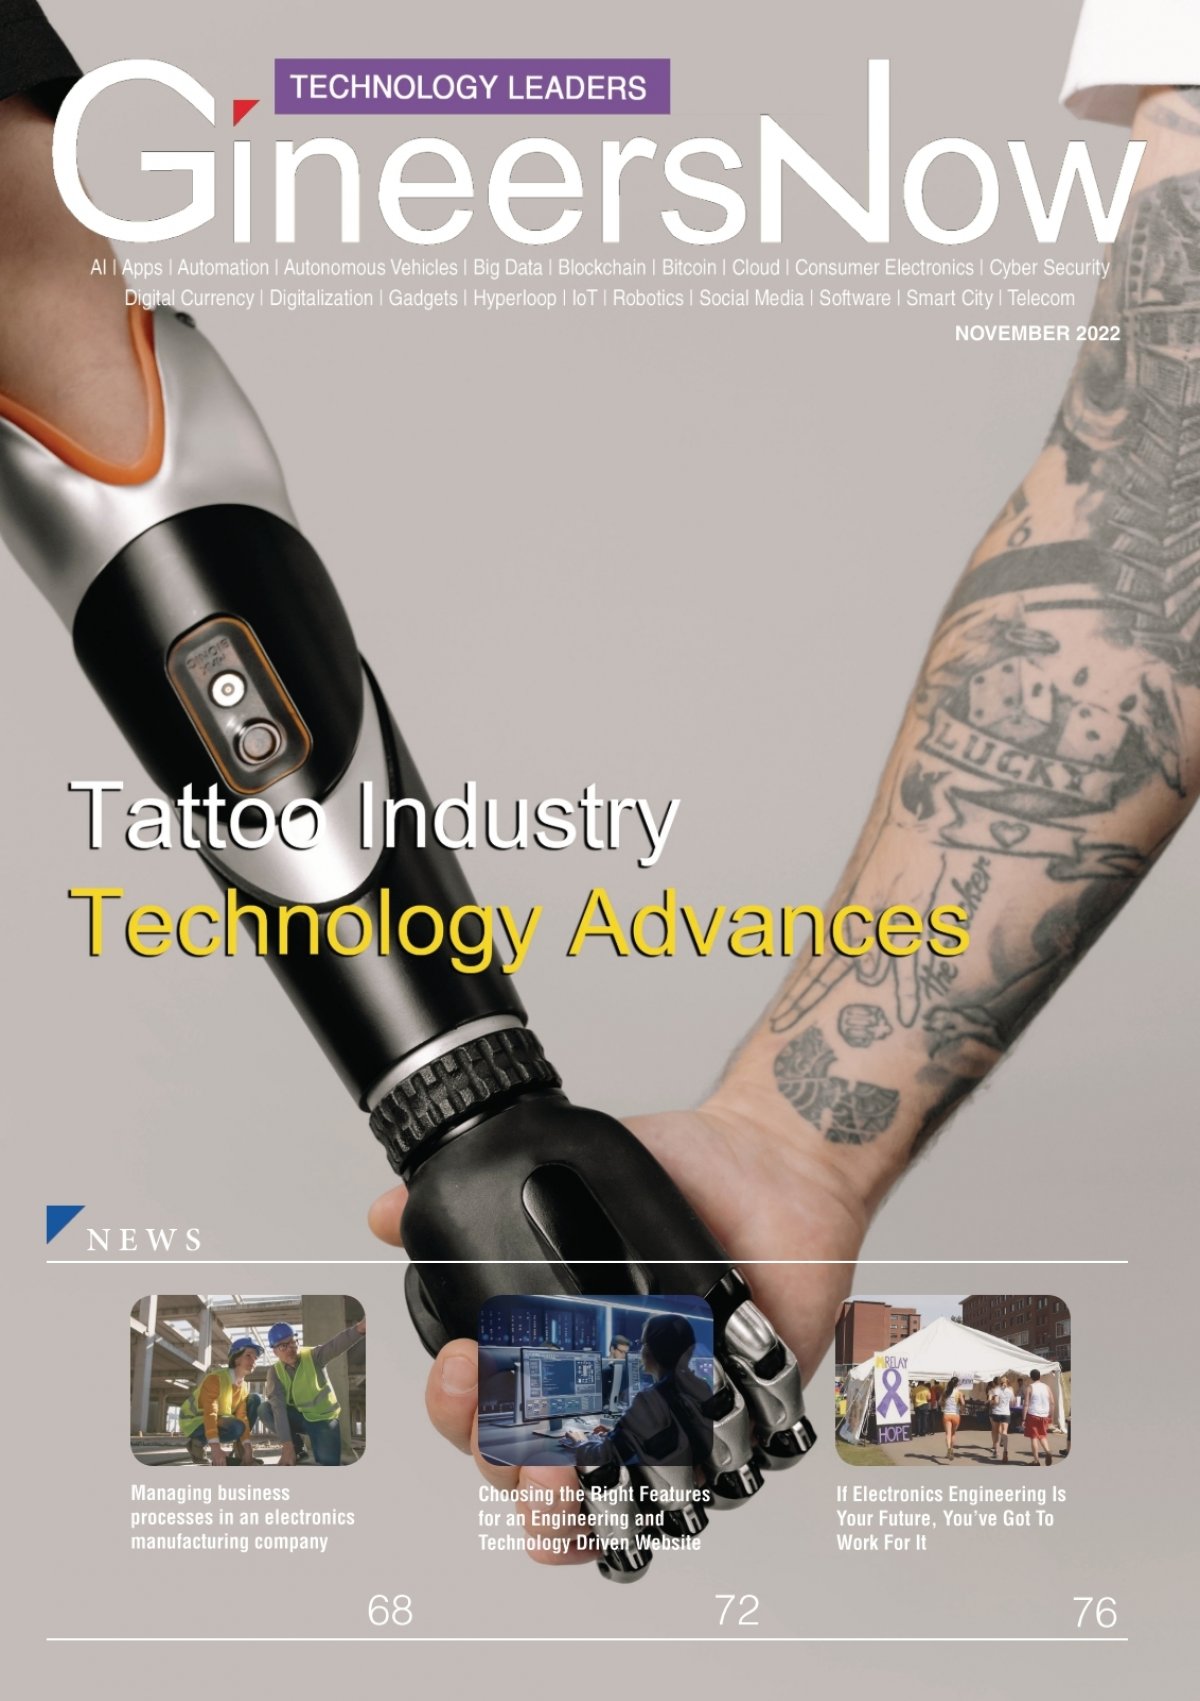 Studio Athena Tattoos in WhitefieldBangalore  Best Armed Security  Services in Bangalore  Justdial